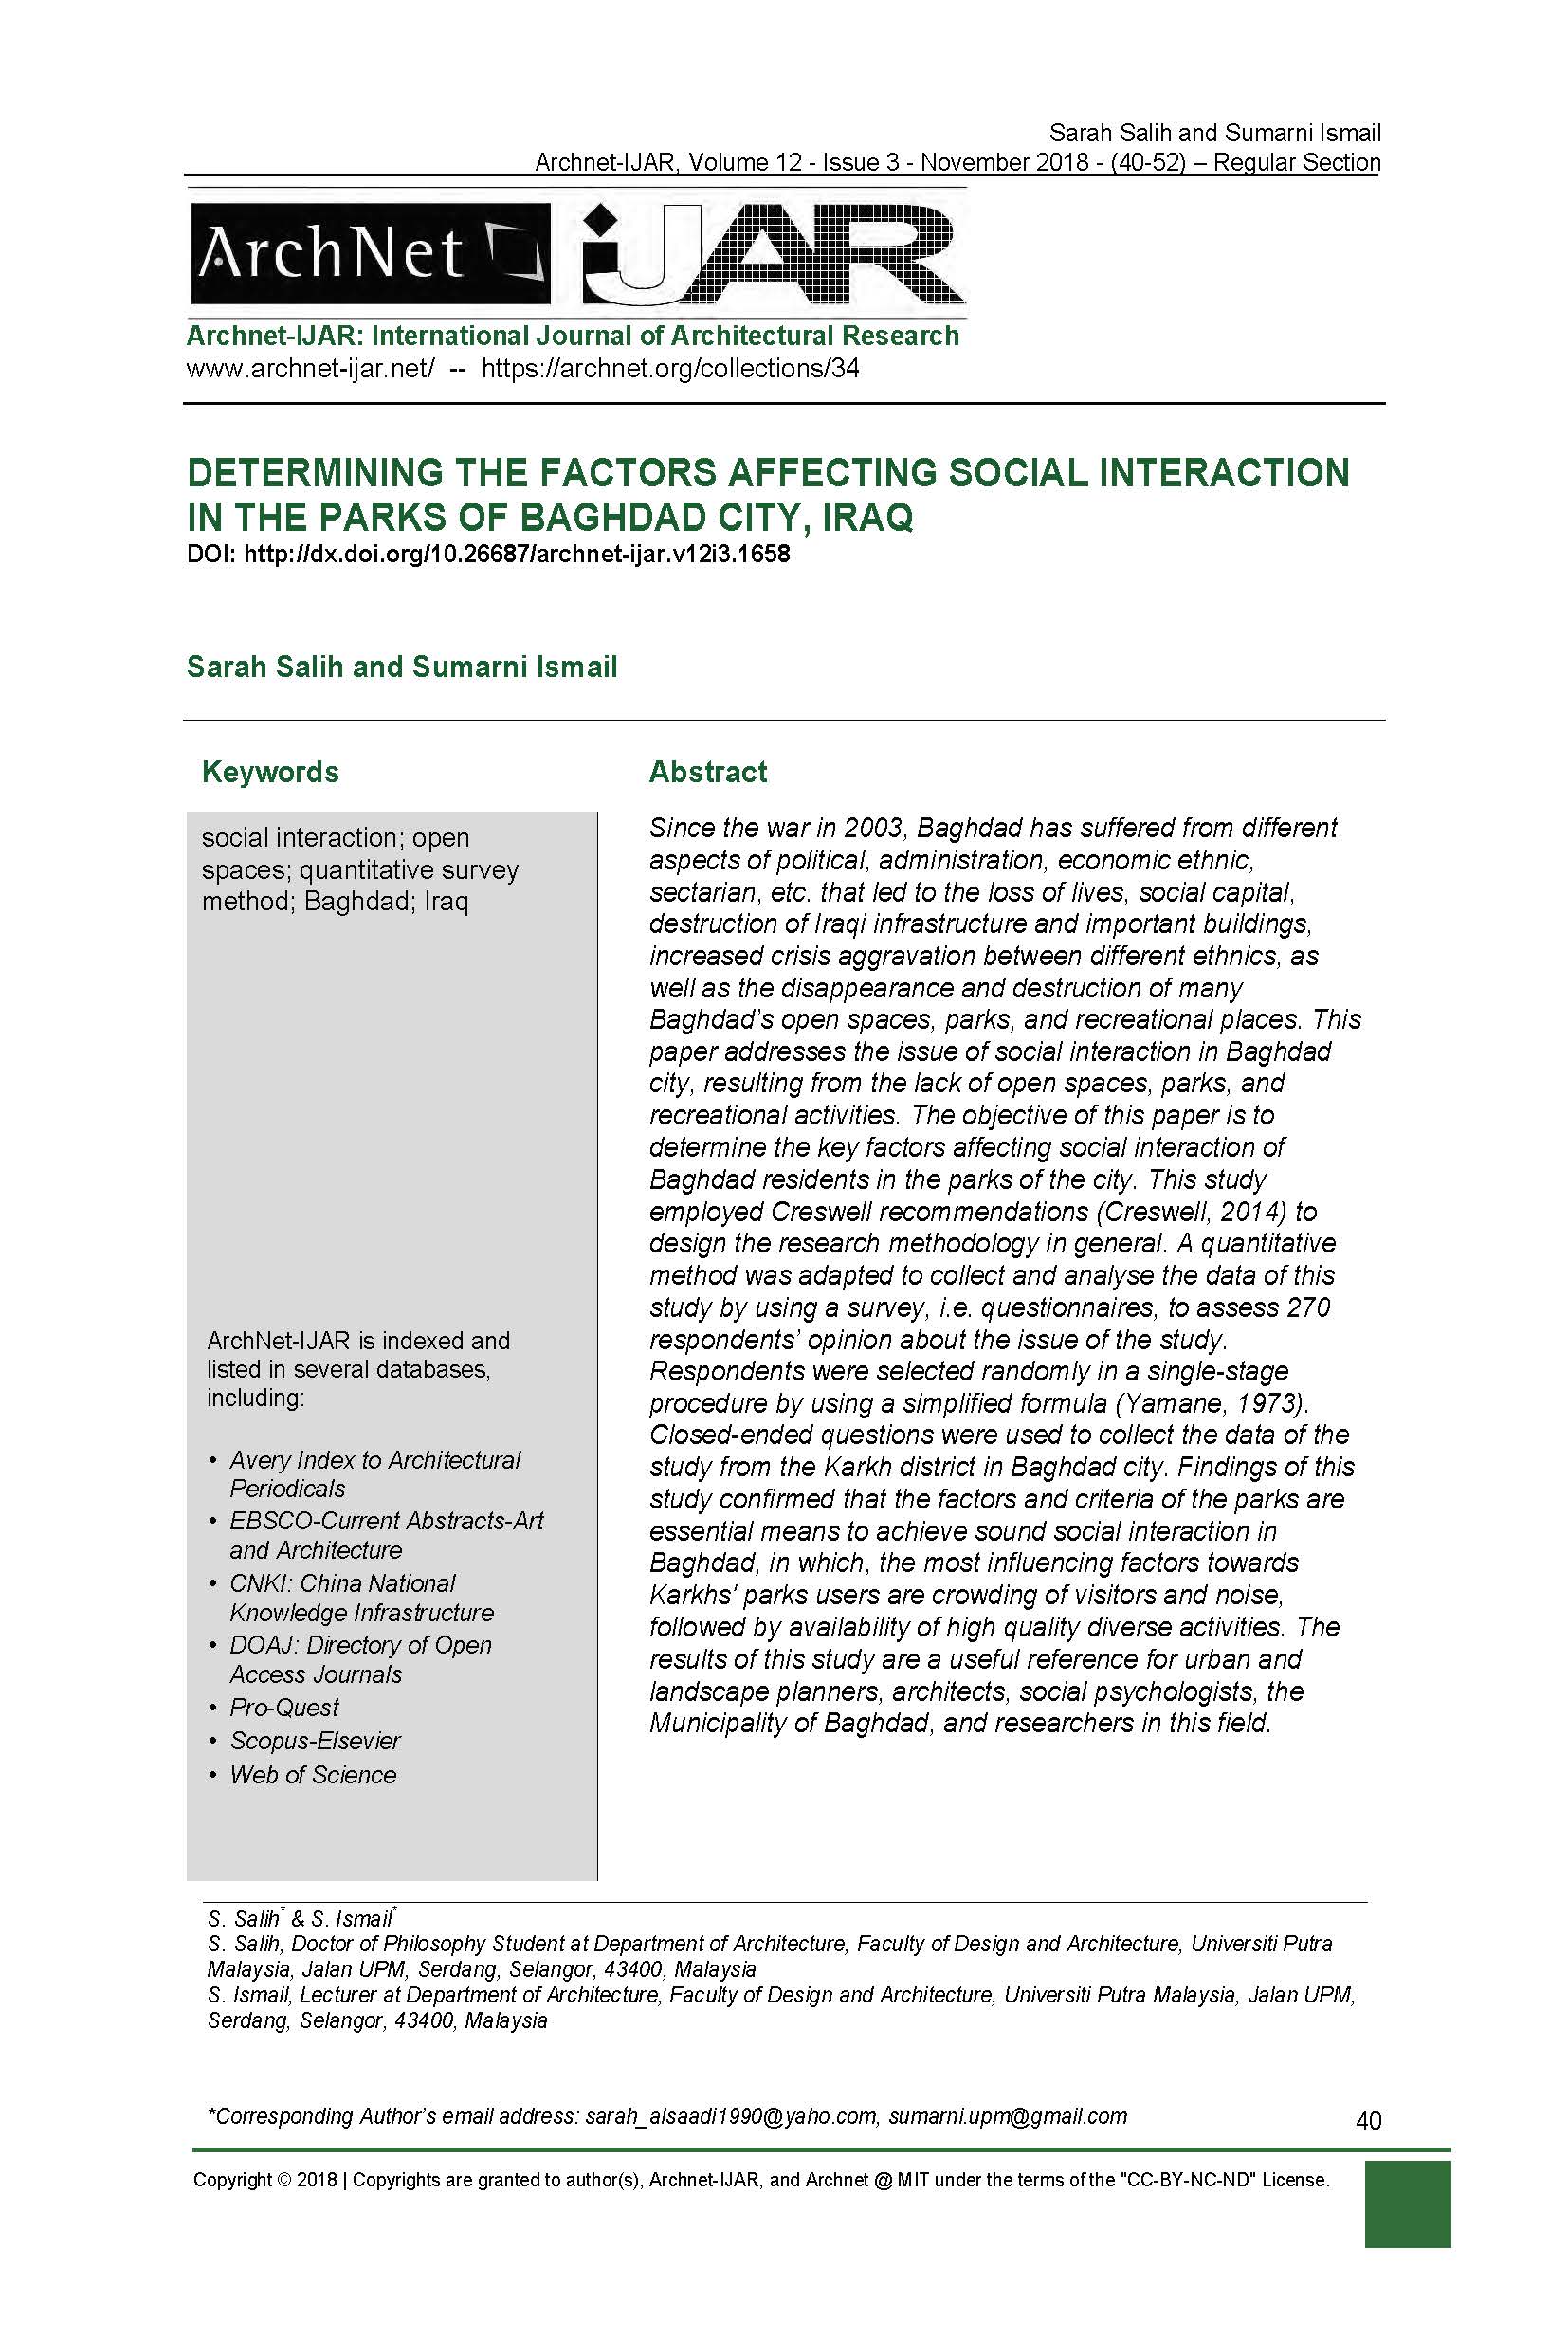 Determining the Factors Affecting Social Interaction in the Parks of Baghdad City, Iraq